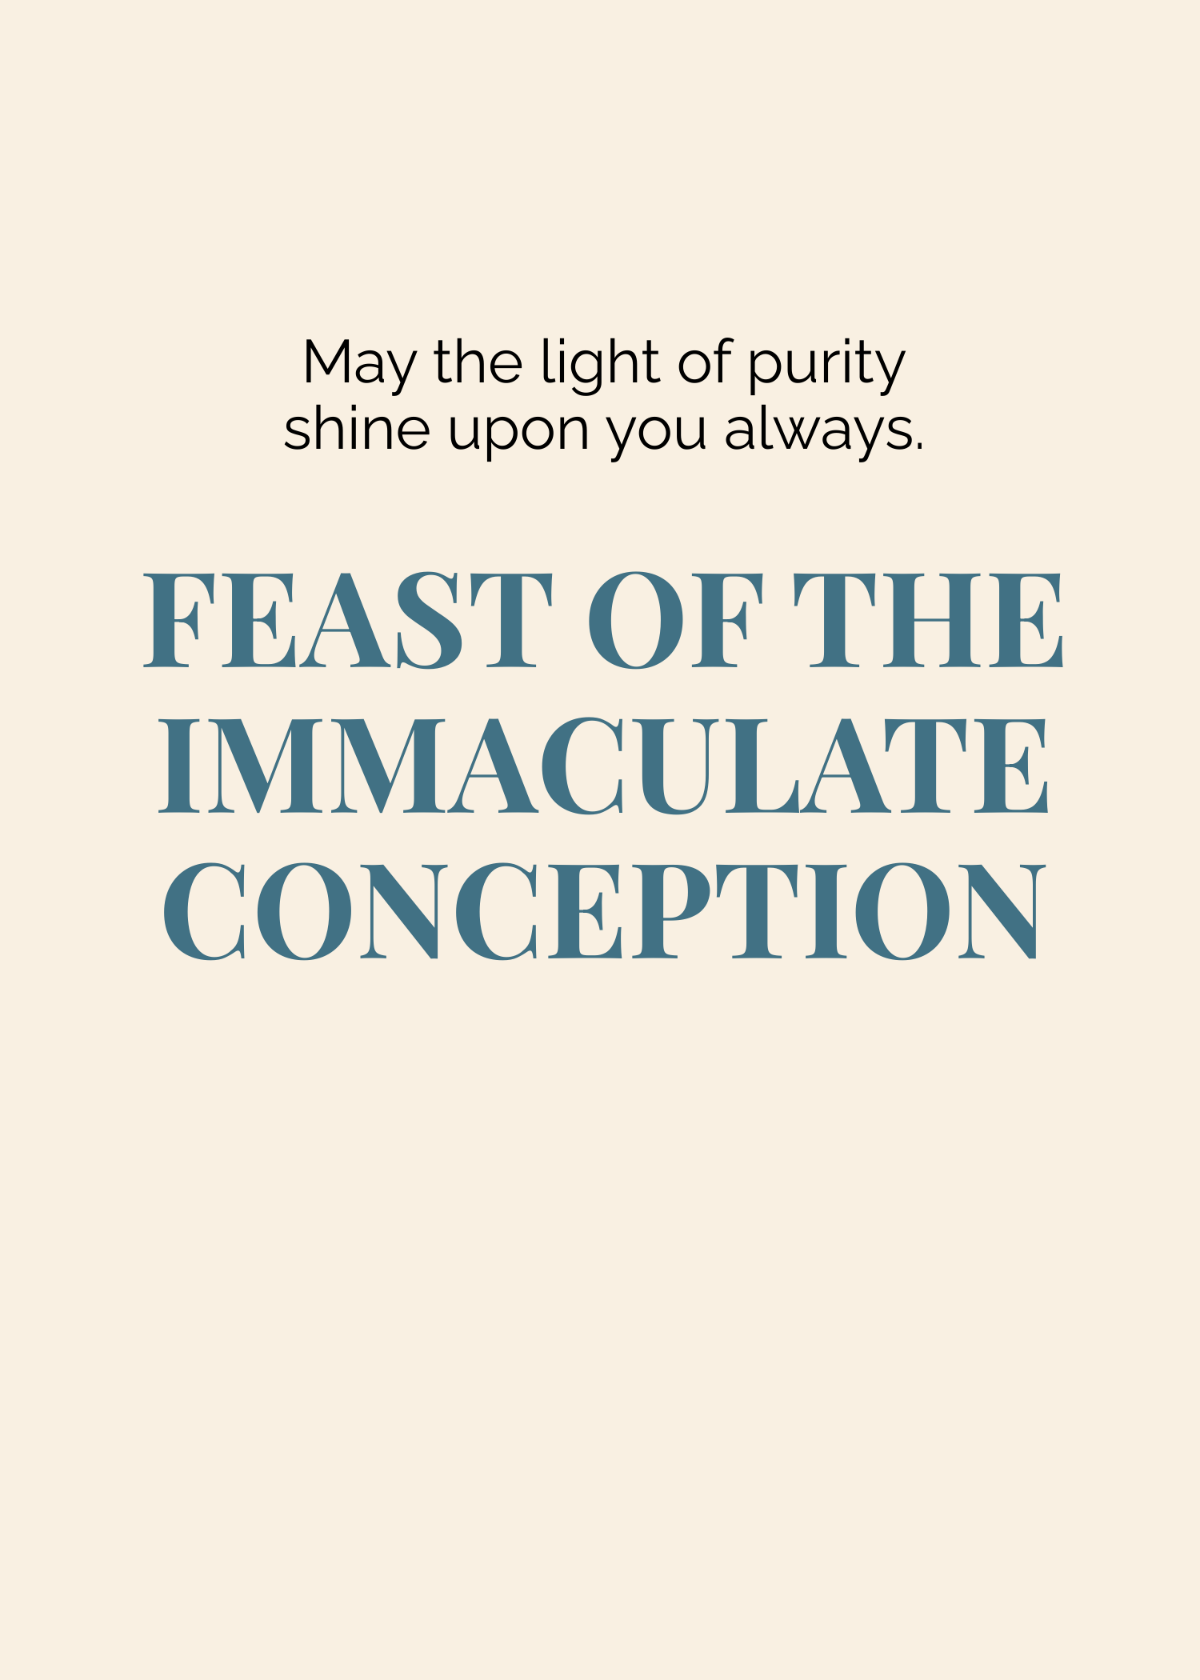 Free Feast of the Immaculate Conception Message Wishes Template